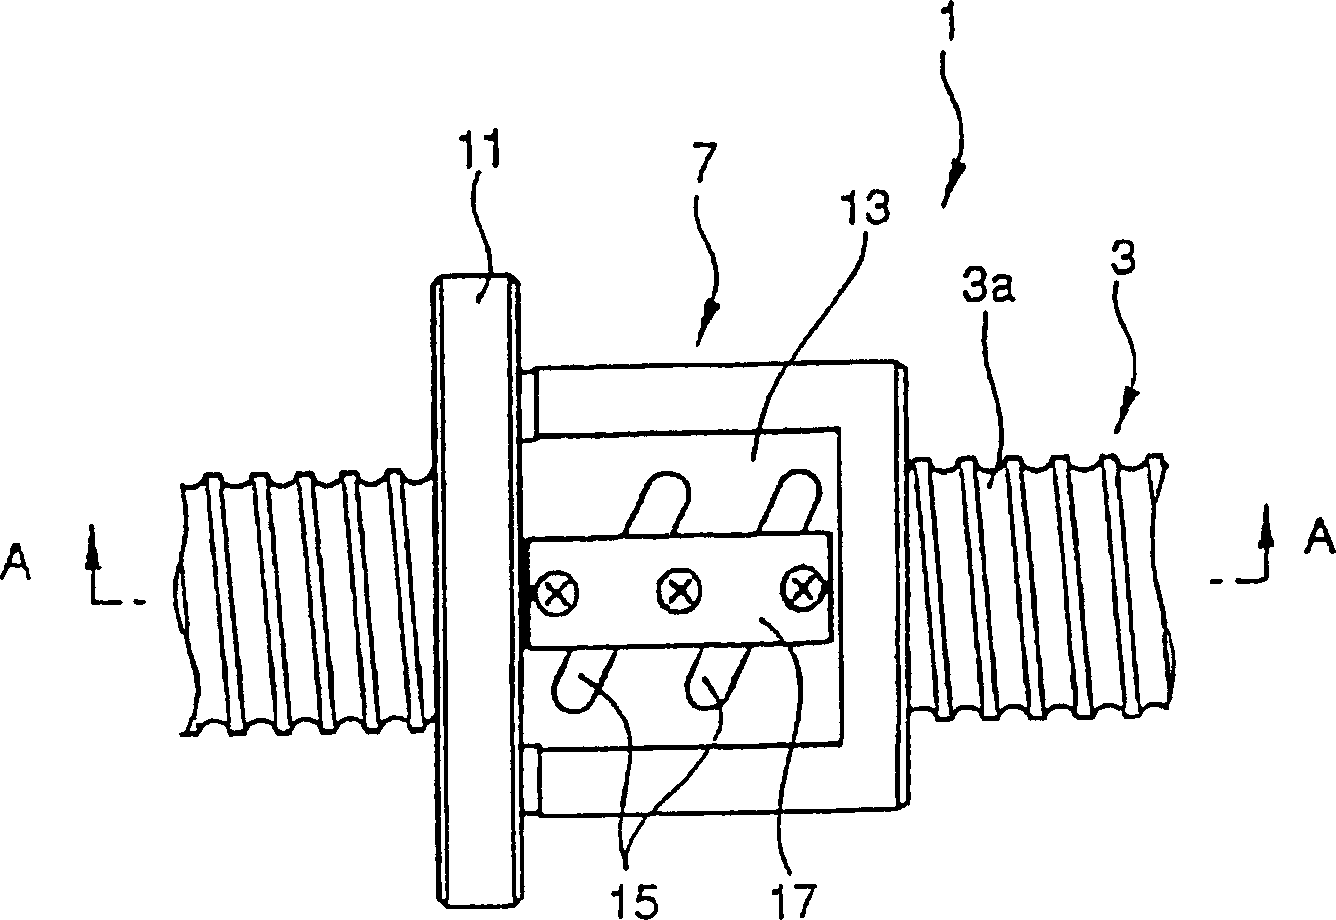 Linear motion device